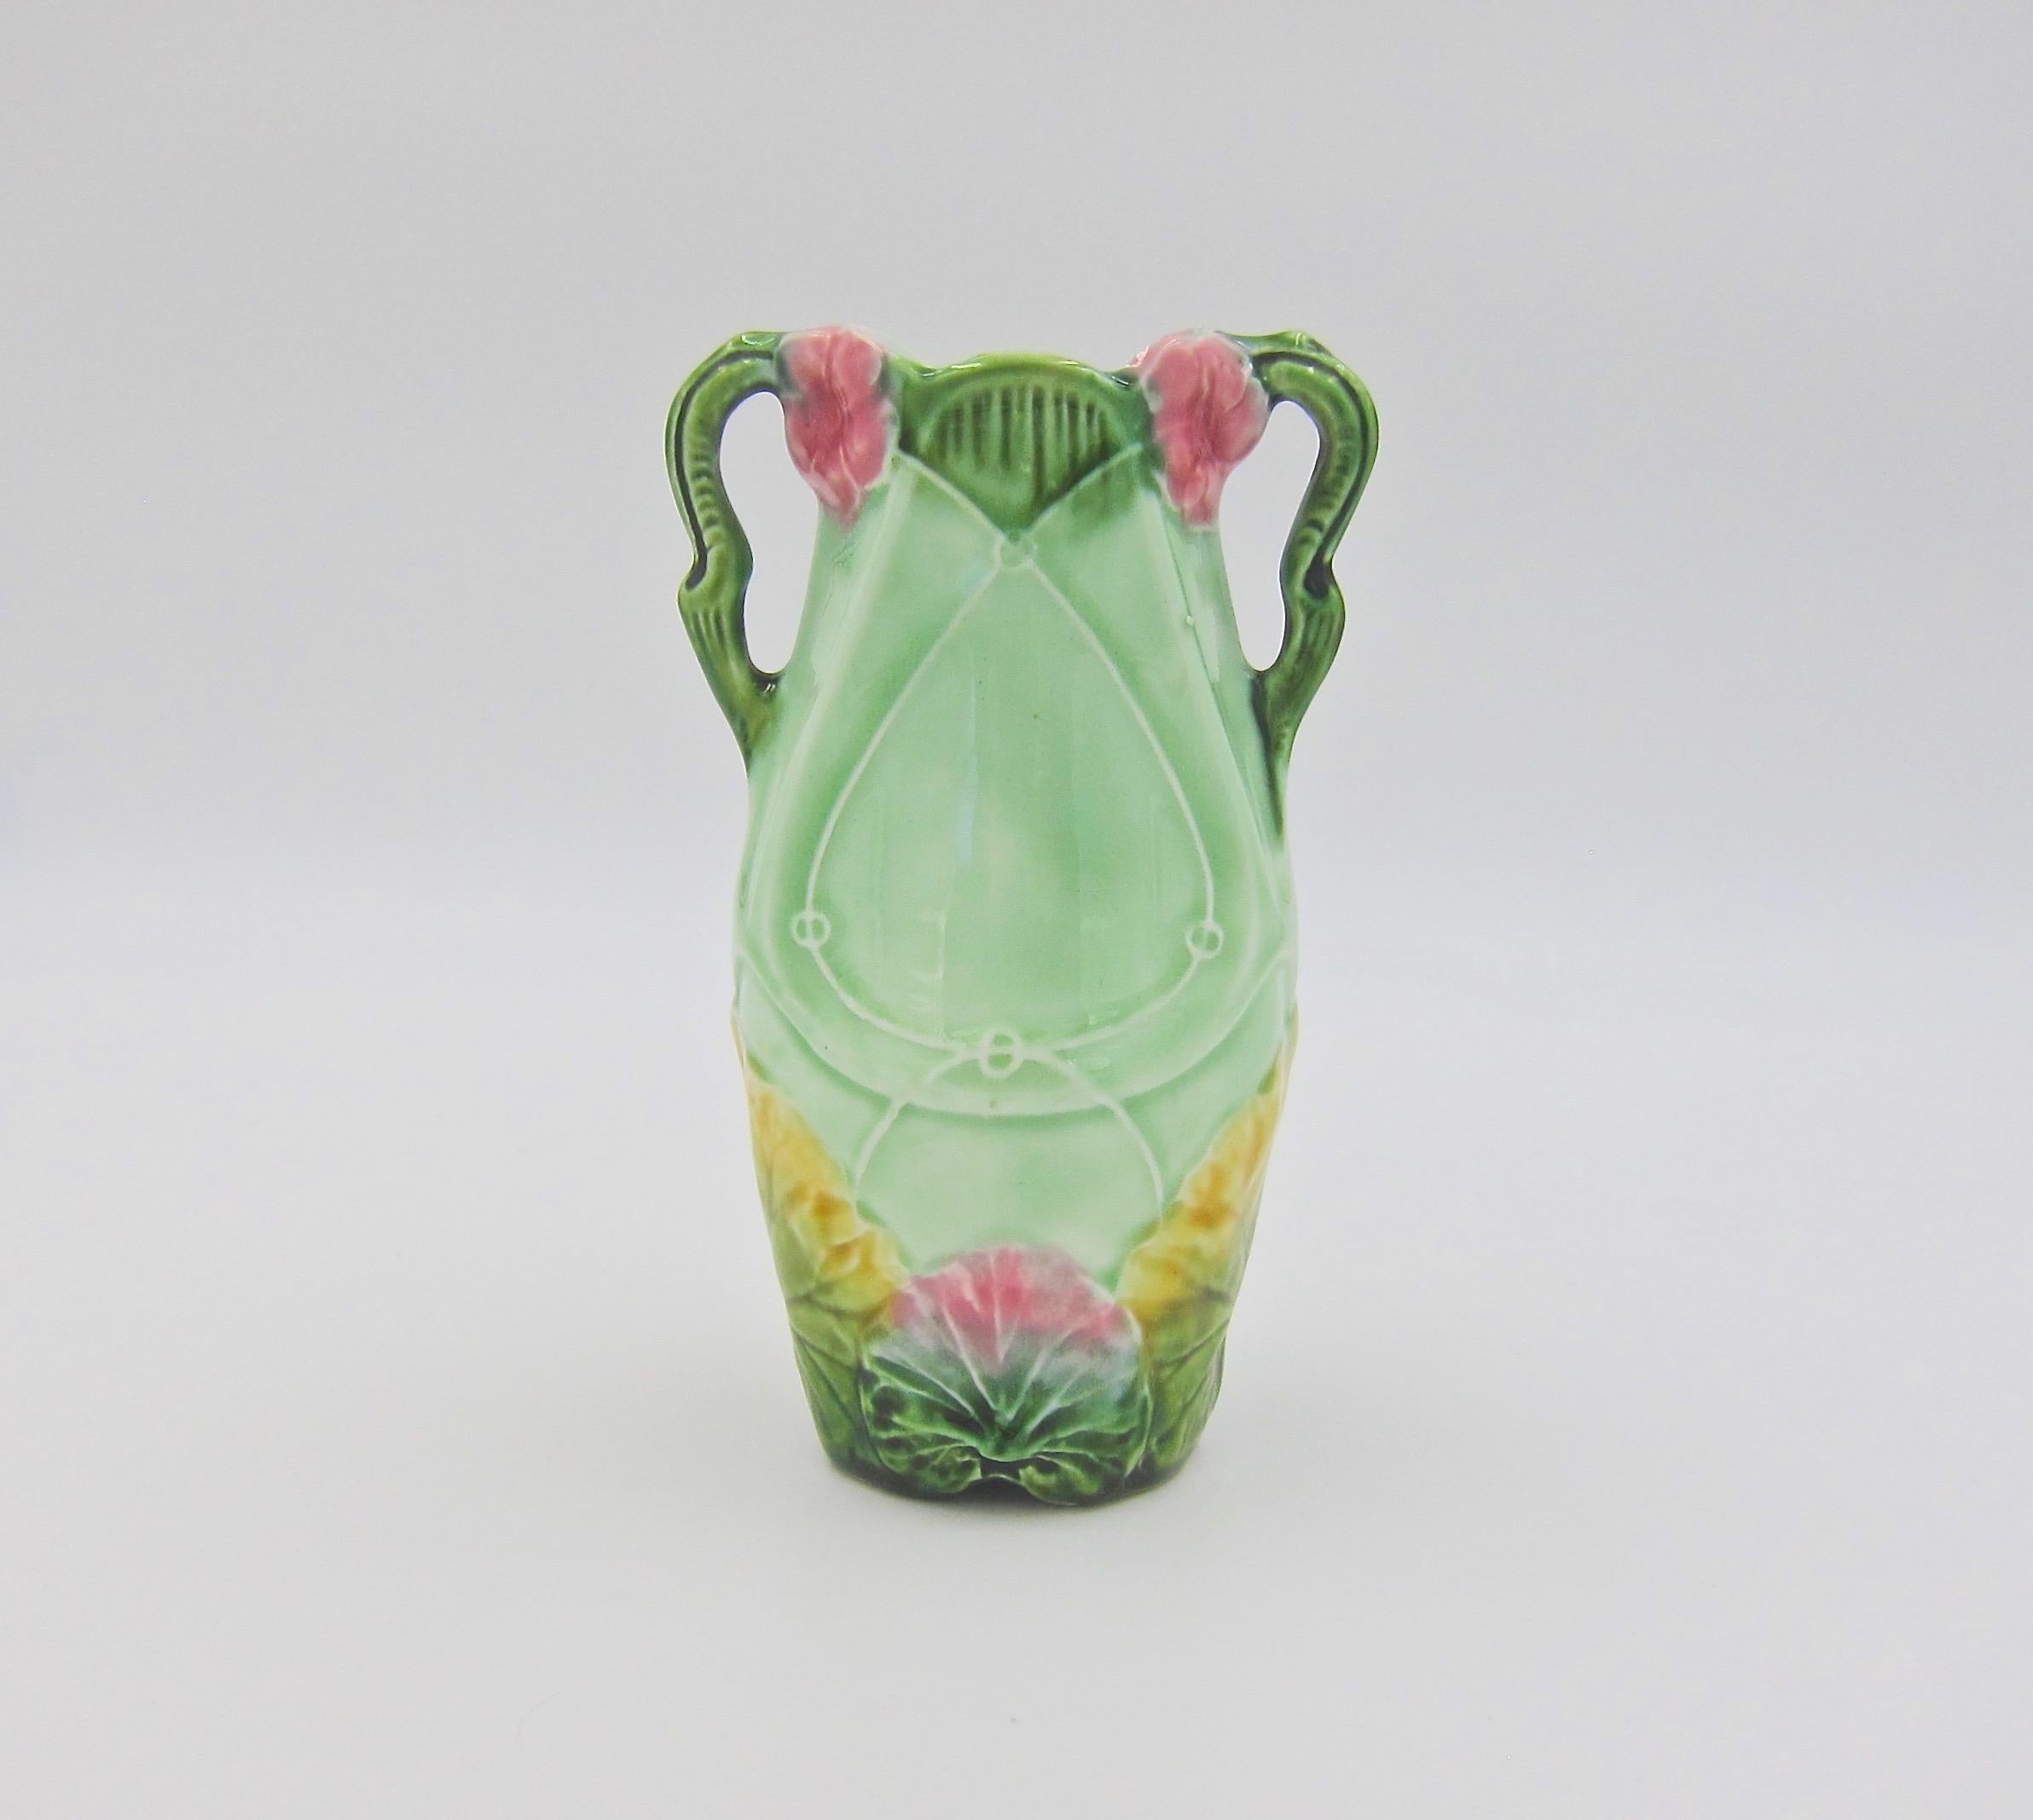 An antique majolica vase in the European Art Nouveau style, dating to the late 19th century. The double-handled vessel is decorated with molded blossoms and leaves glazed in vibrant pink, yellow, and green against a ground of pale green. The